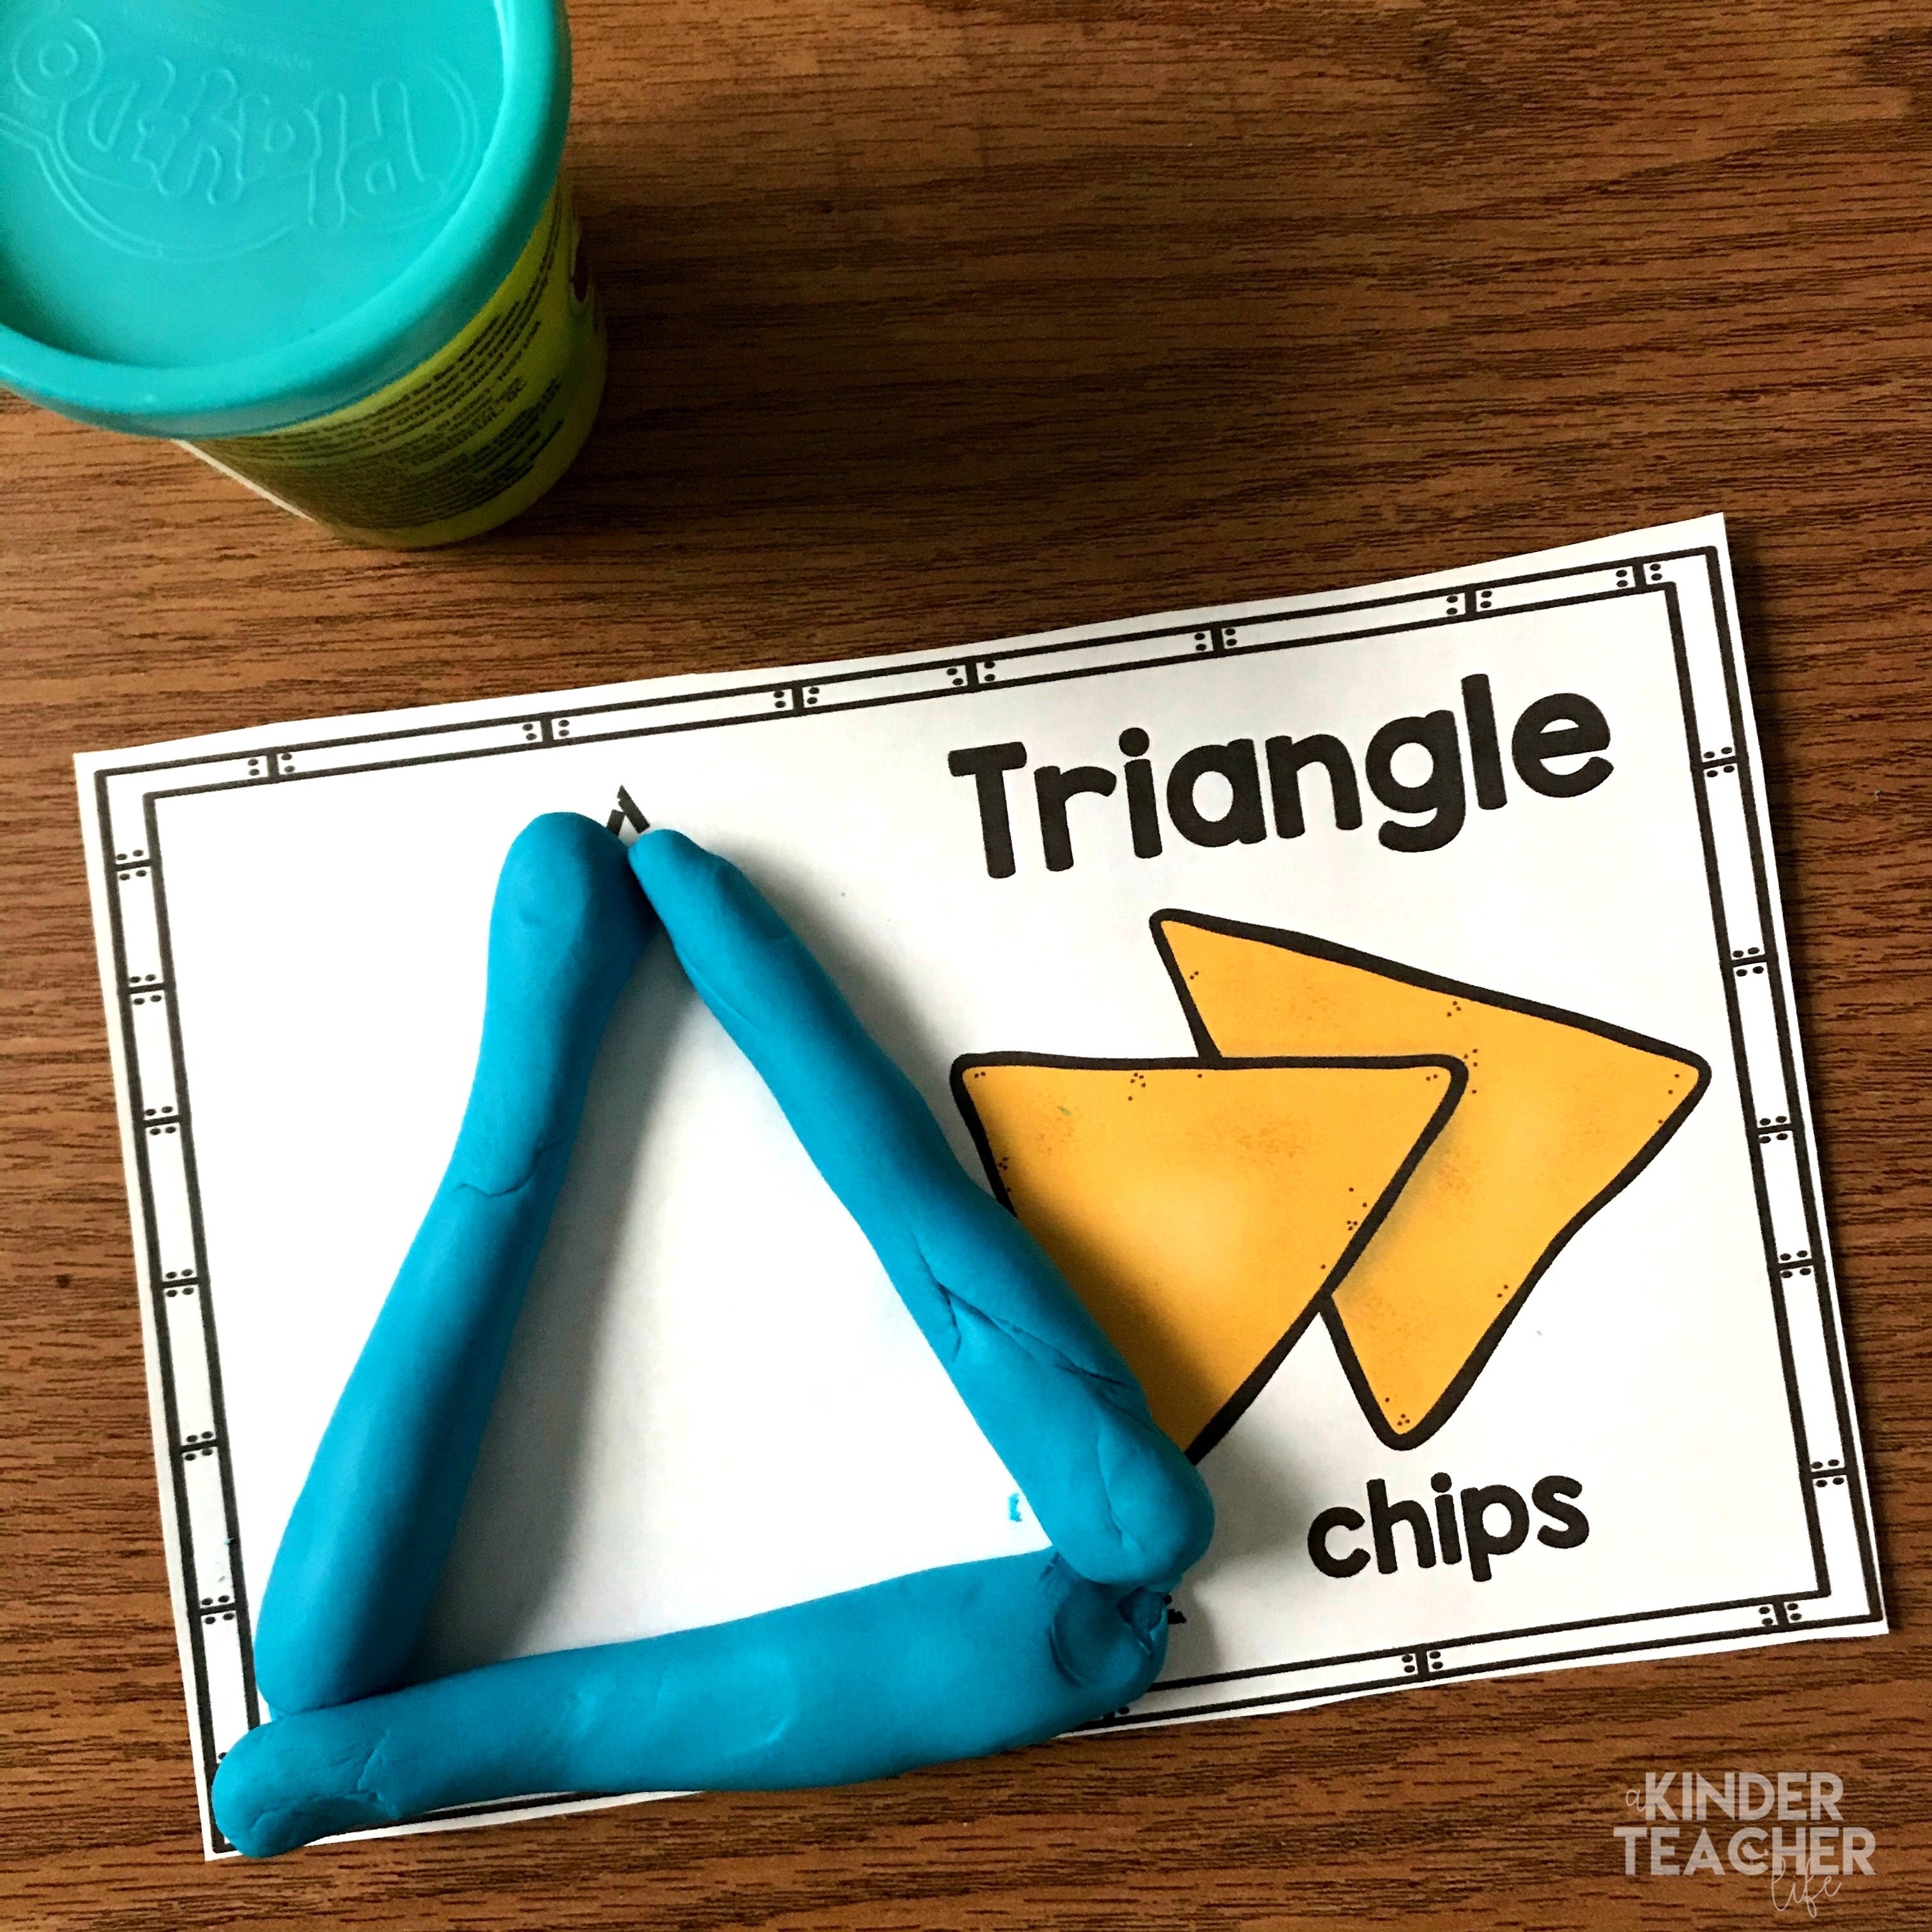 Use play dough to make 2D shapes. 